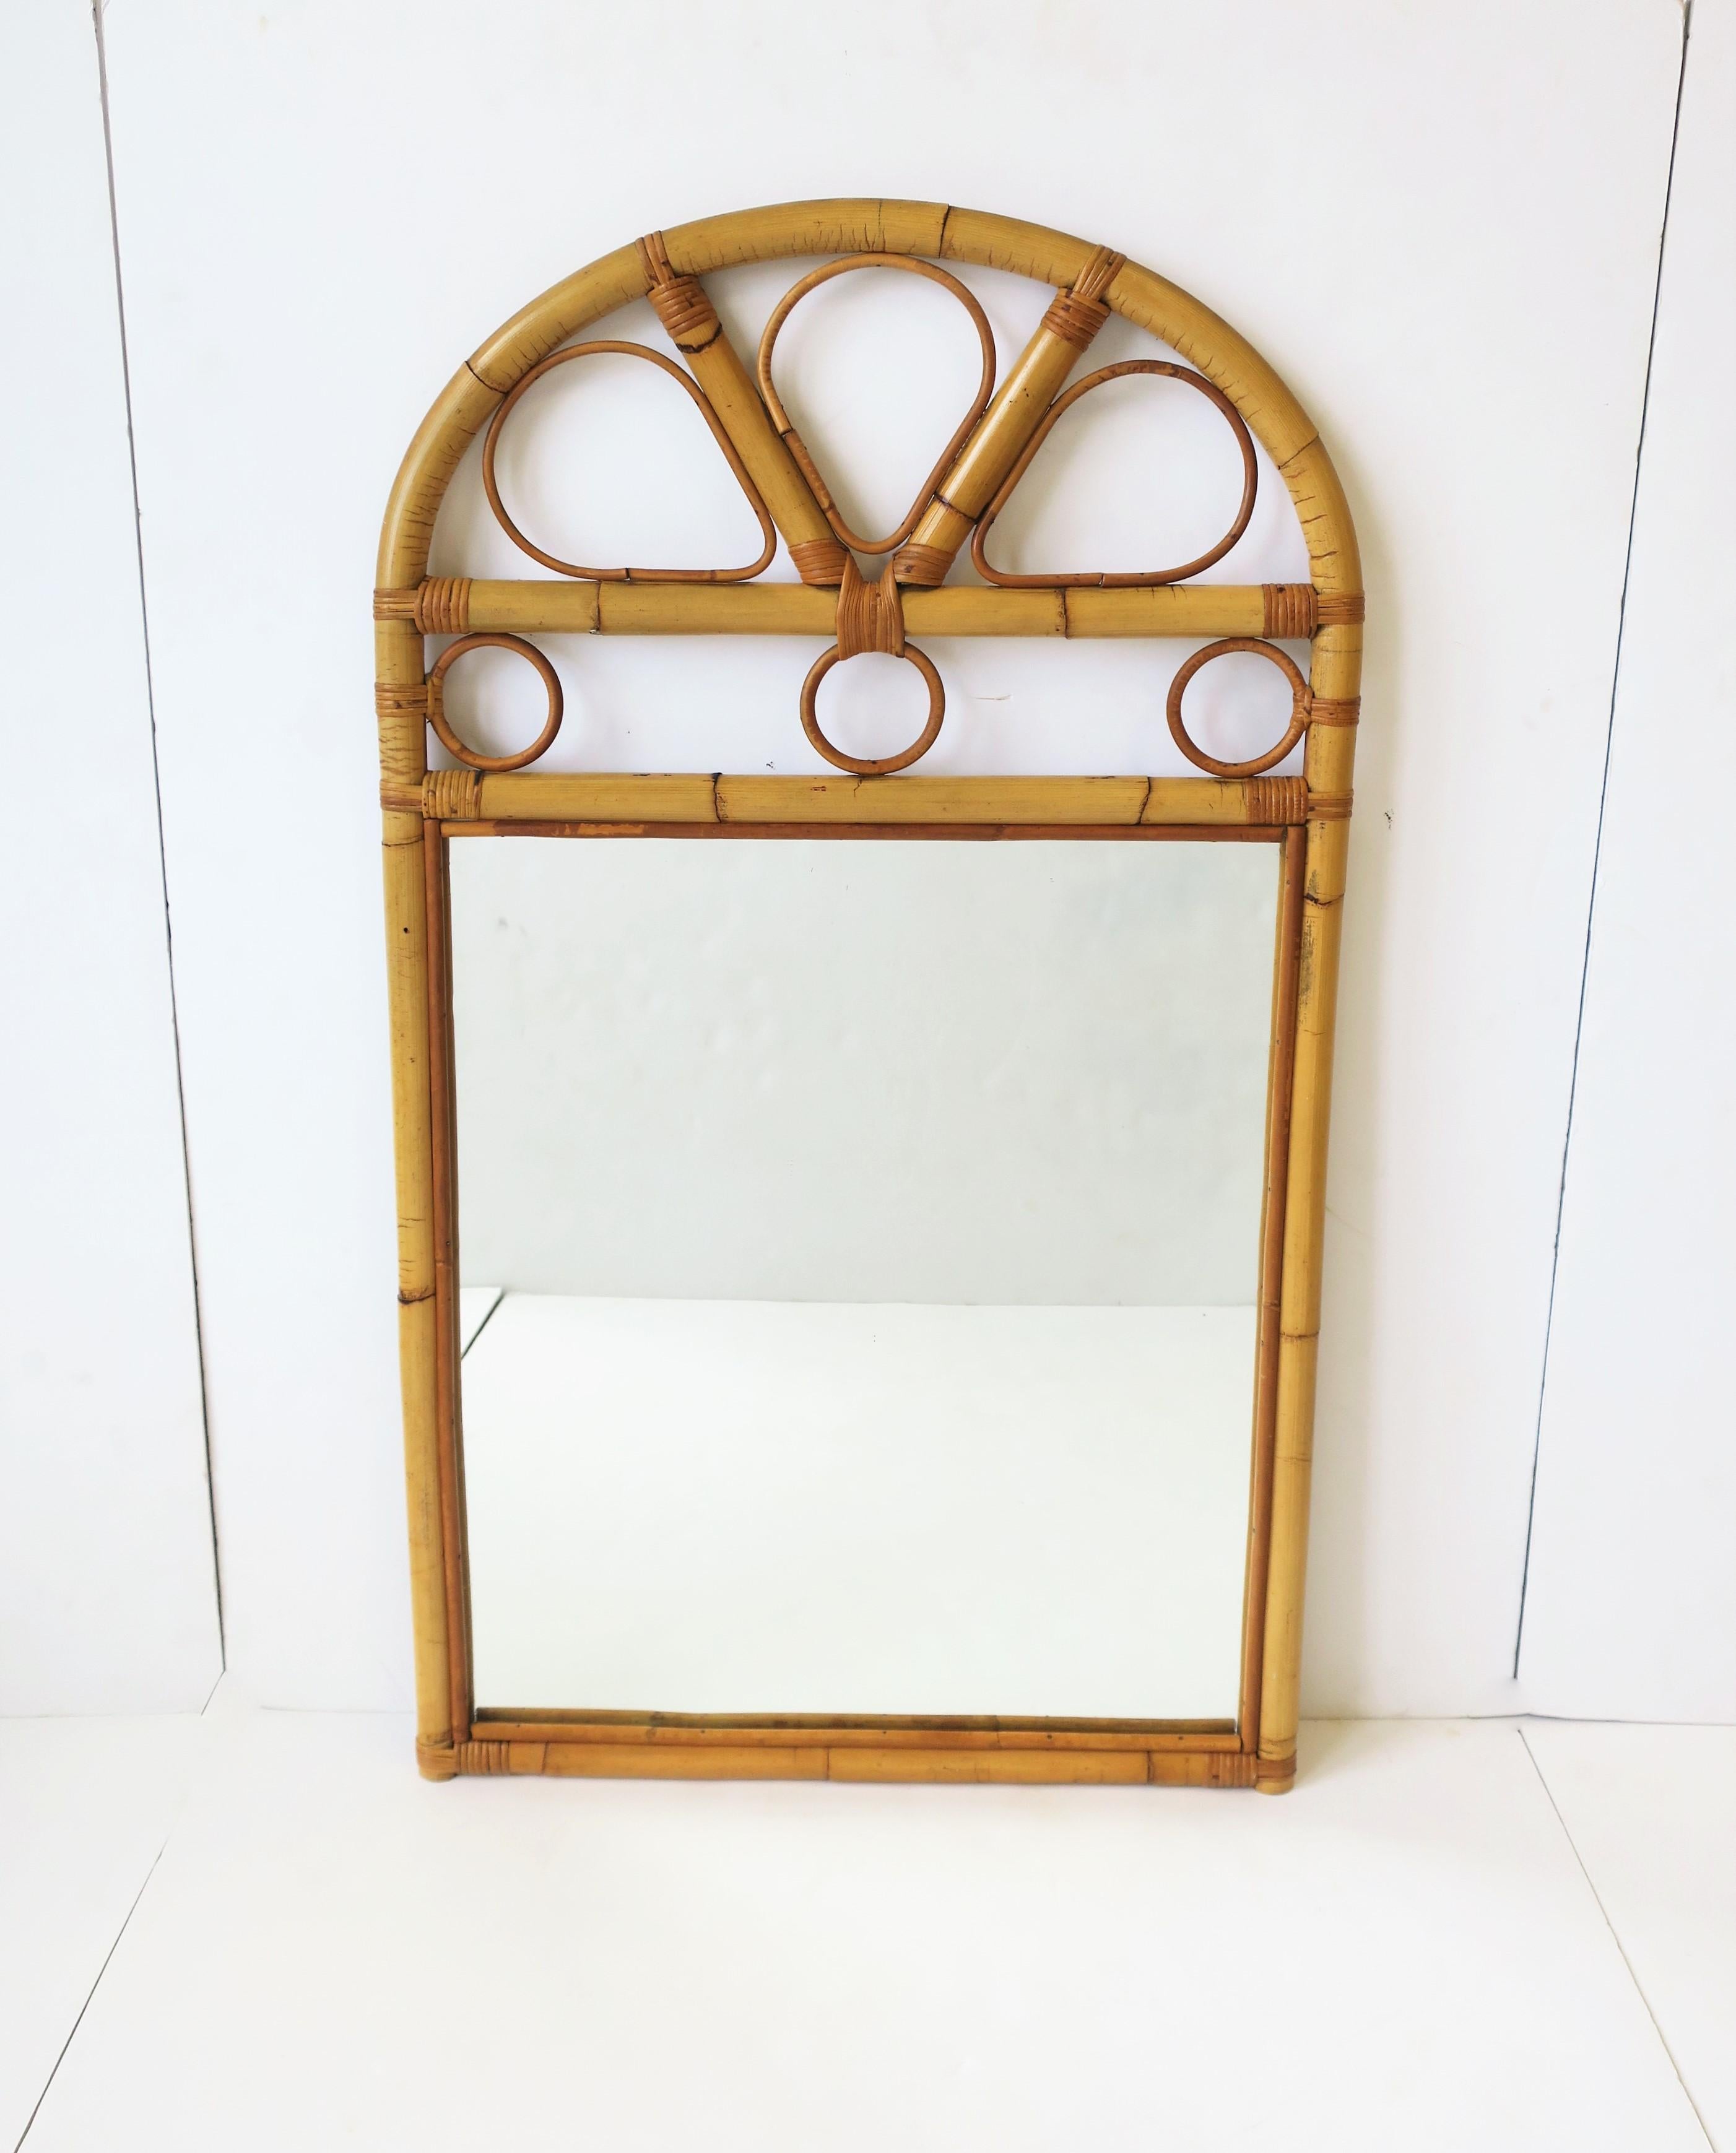 A vintage dark blonde and tan wicker rattan bentwood rectangular wall mirror with loop and circle design, circa 1960s-1970s, USA. If you're looking for bamboo, rattan is an alternative. Dimensions: 21